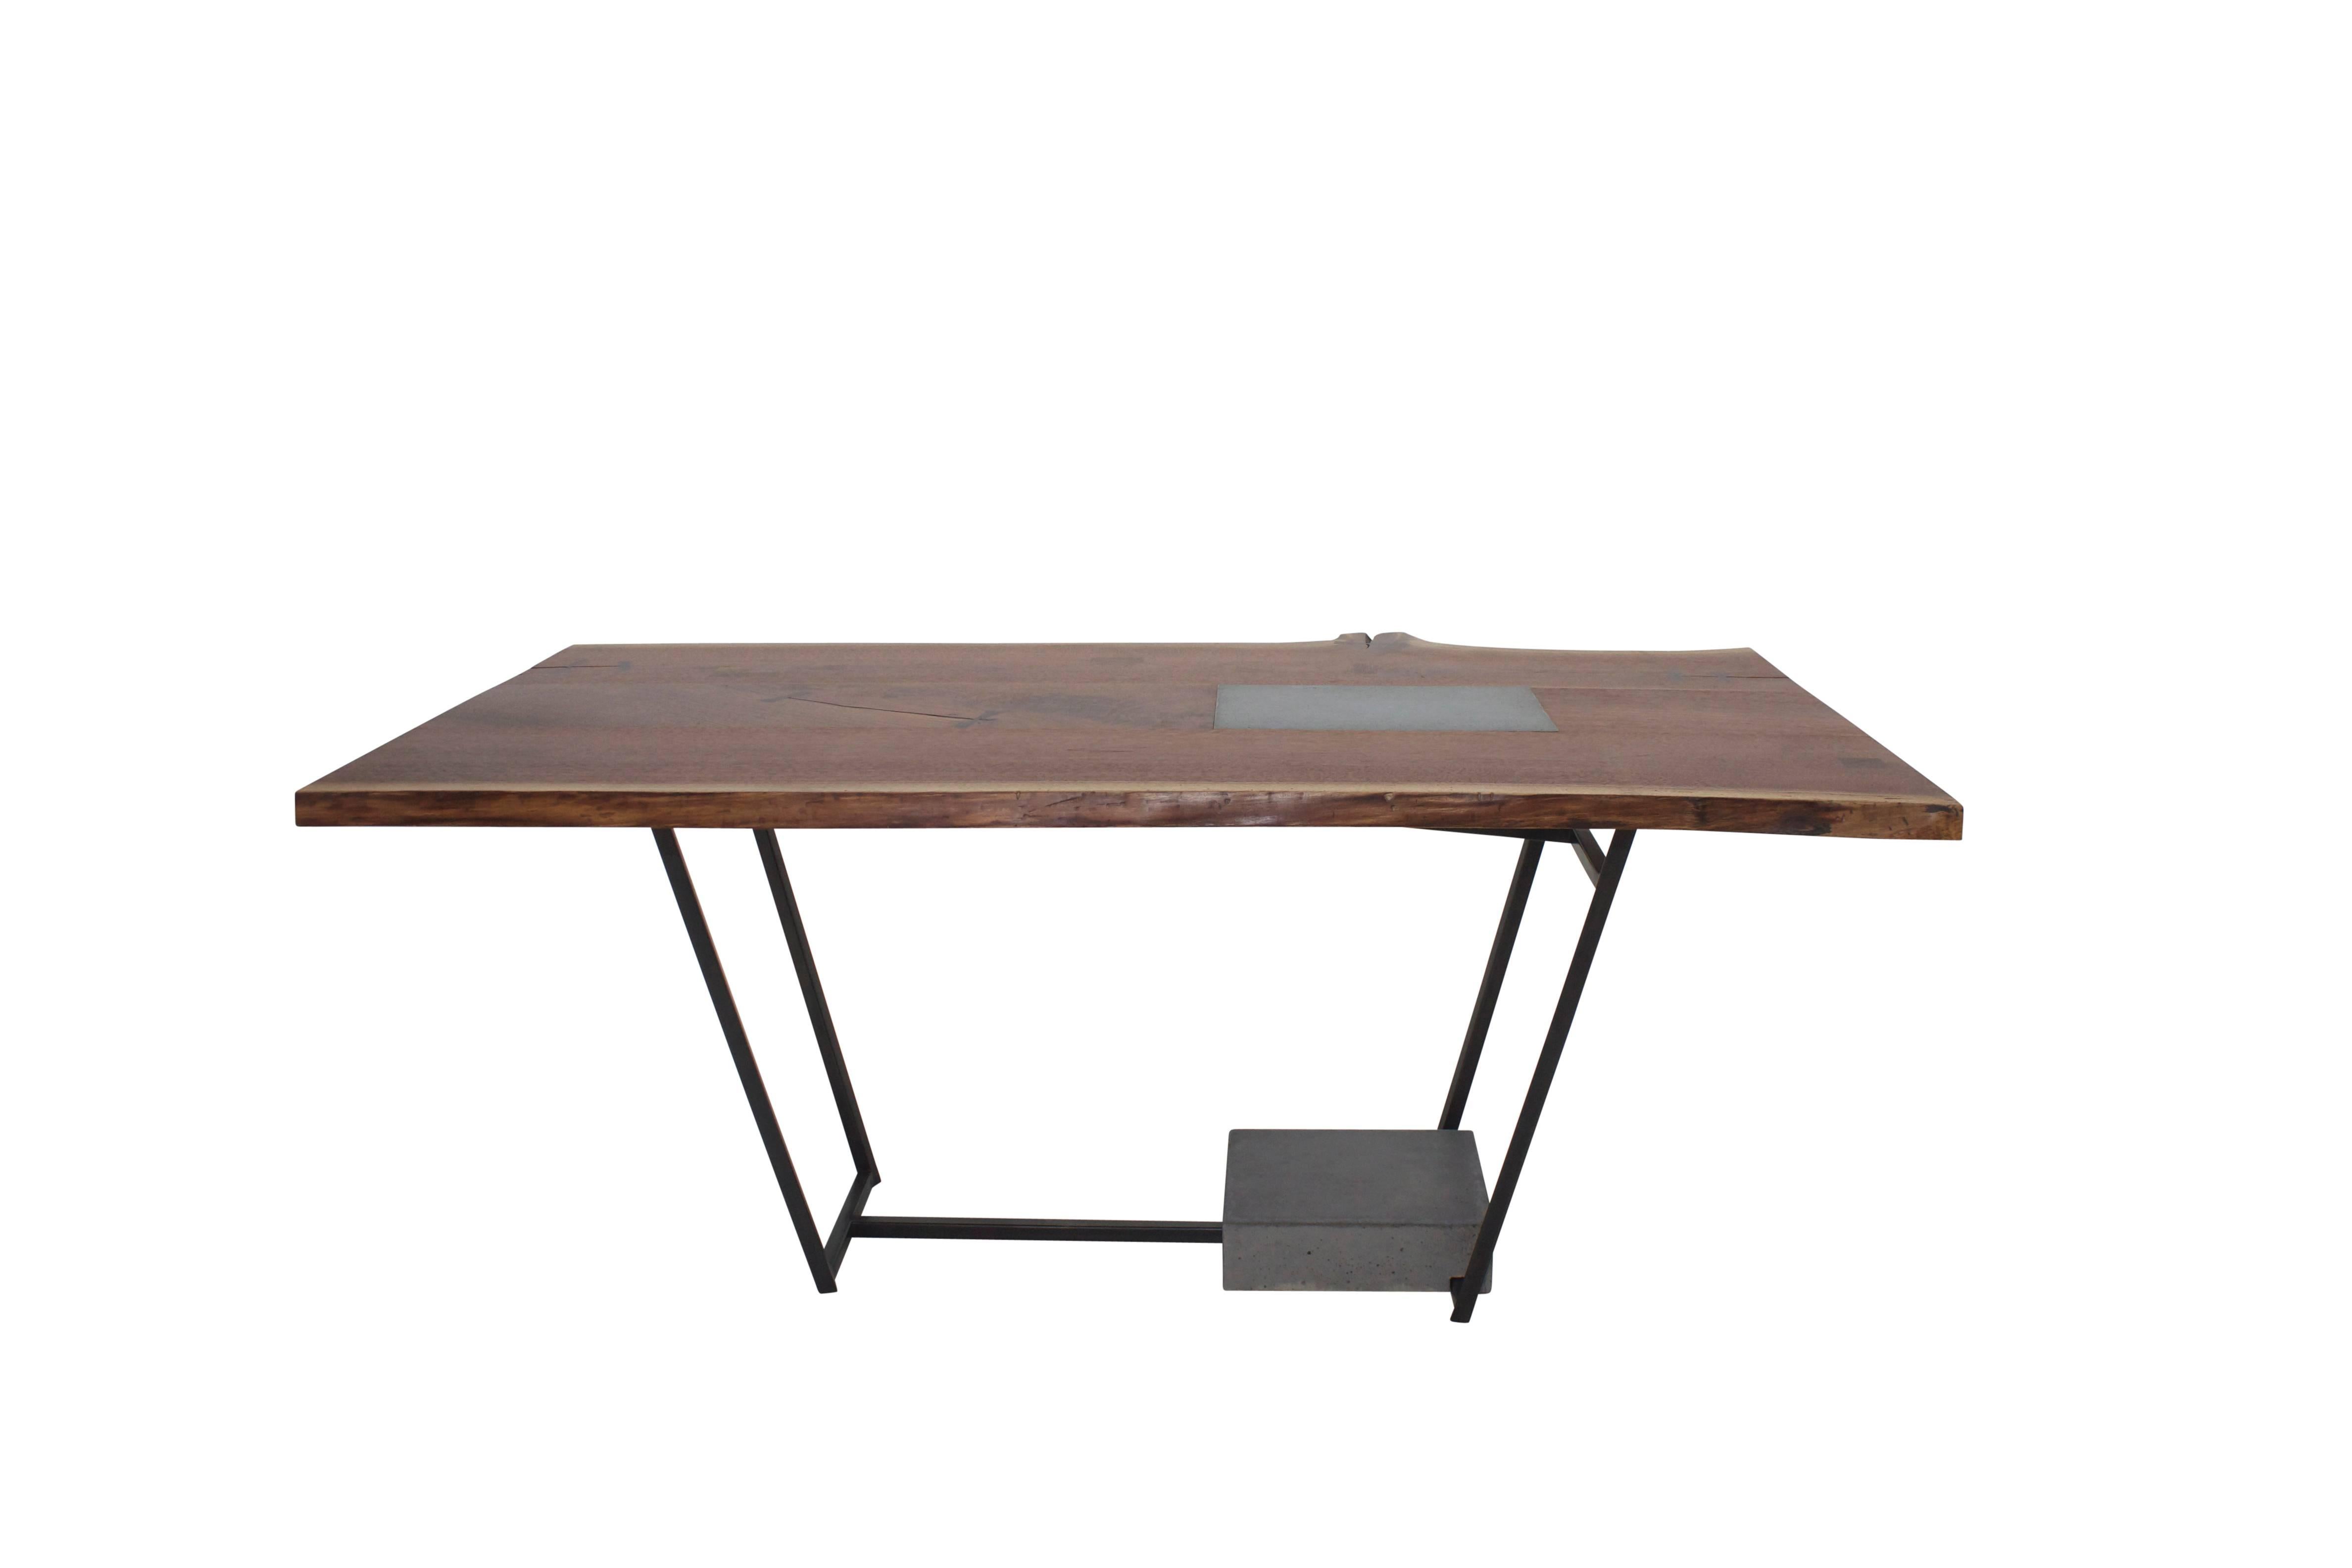 The SCW Table combines three elemental materials steel, concrete and wood. The top is constructed of live-edge walnut boards. Walnut inlays cover knots and Gabon Ebony butterfly keys preserve the natural beauty of the splits. A cement inset is ideal